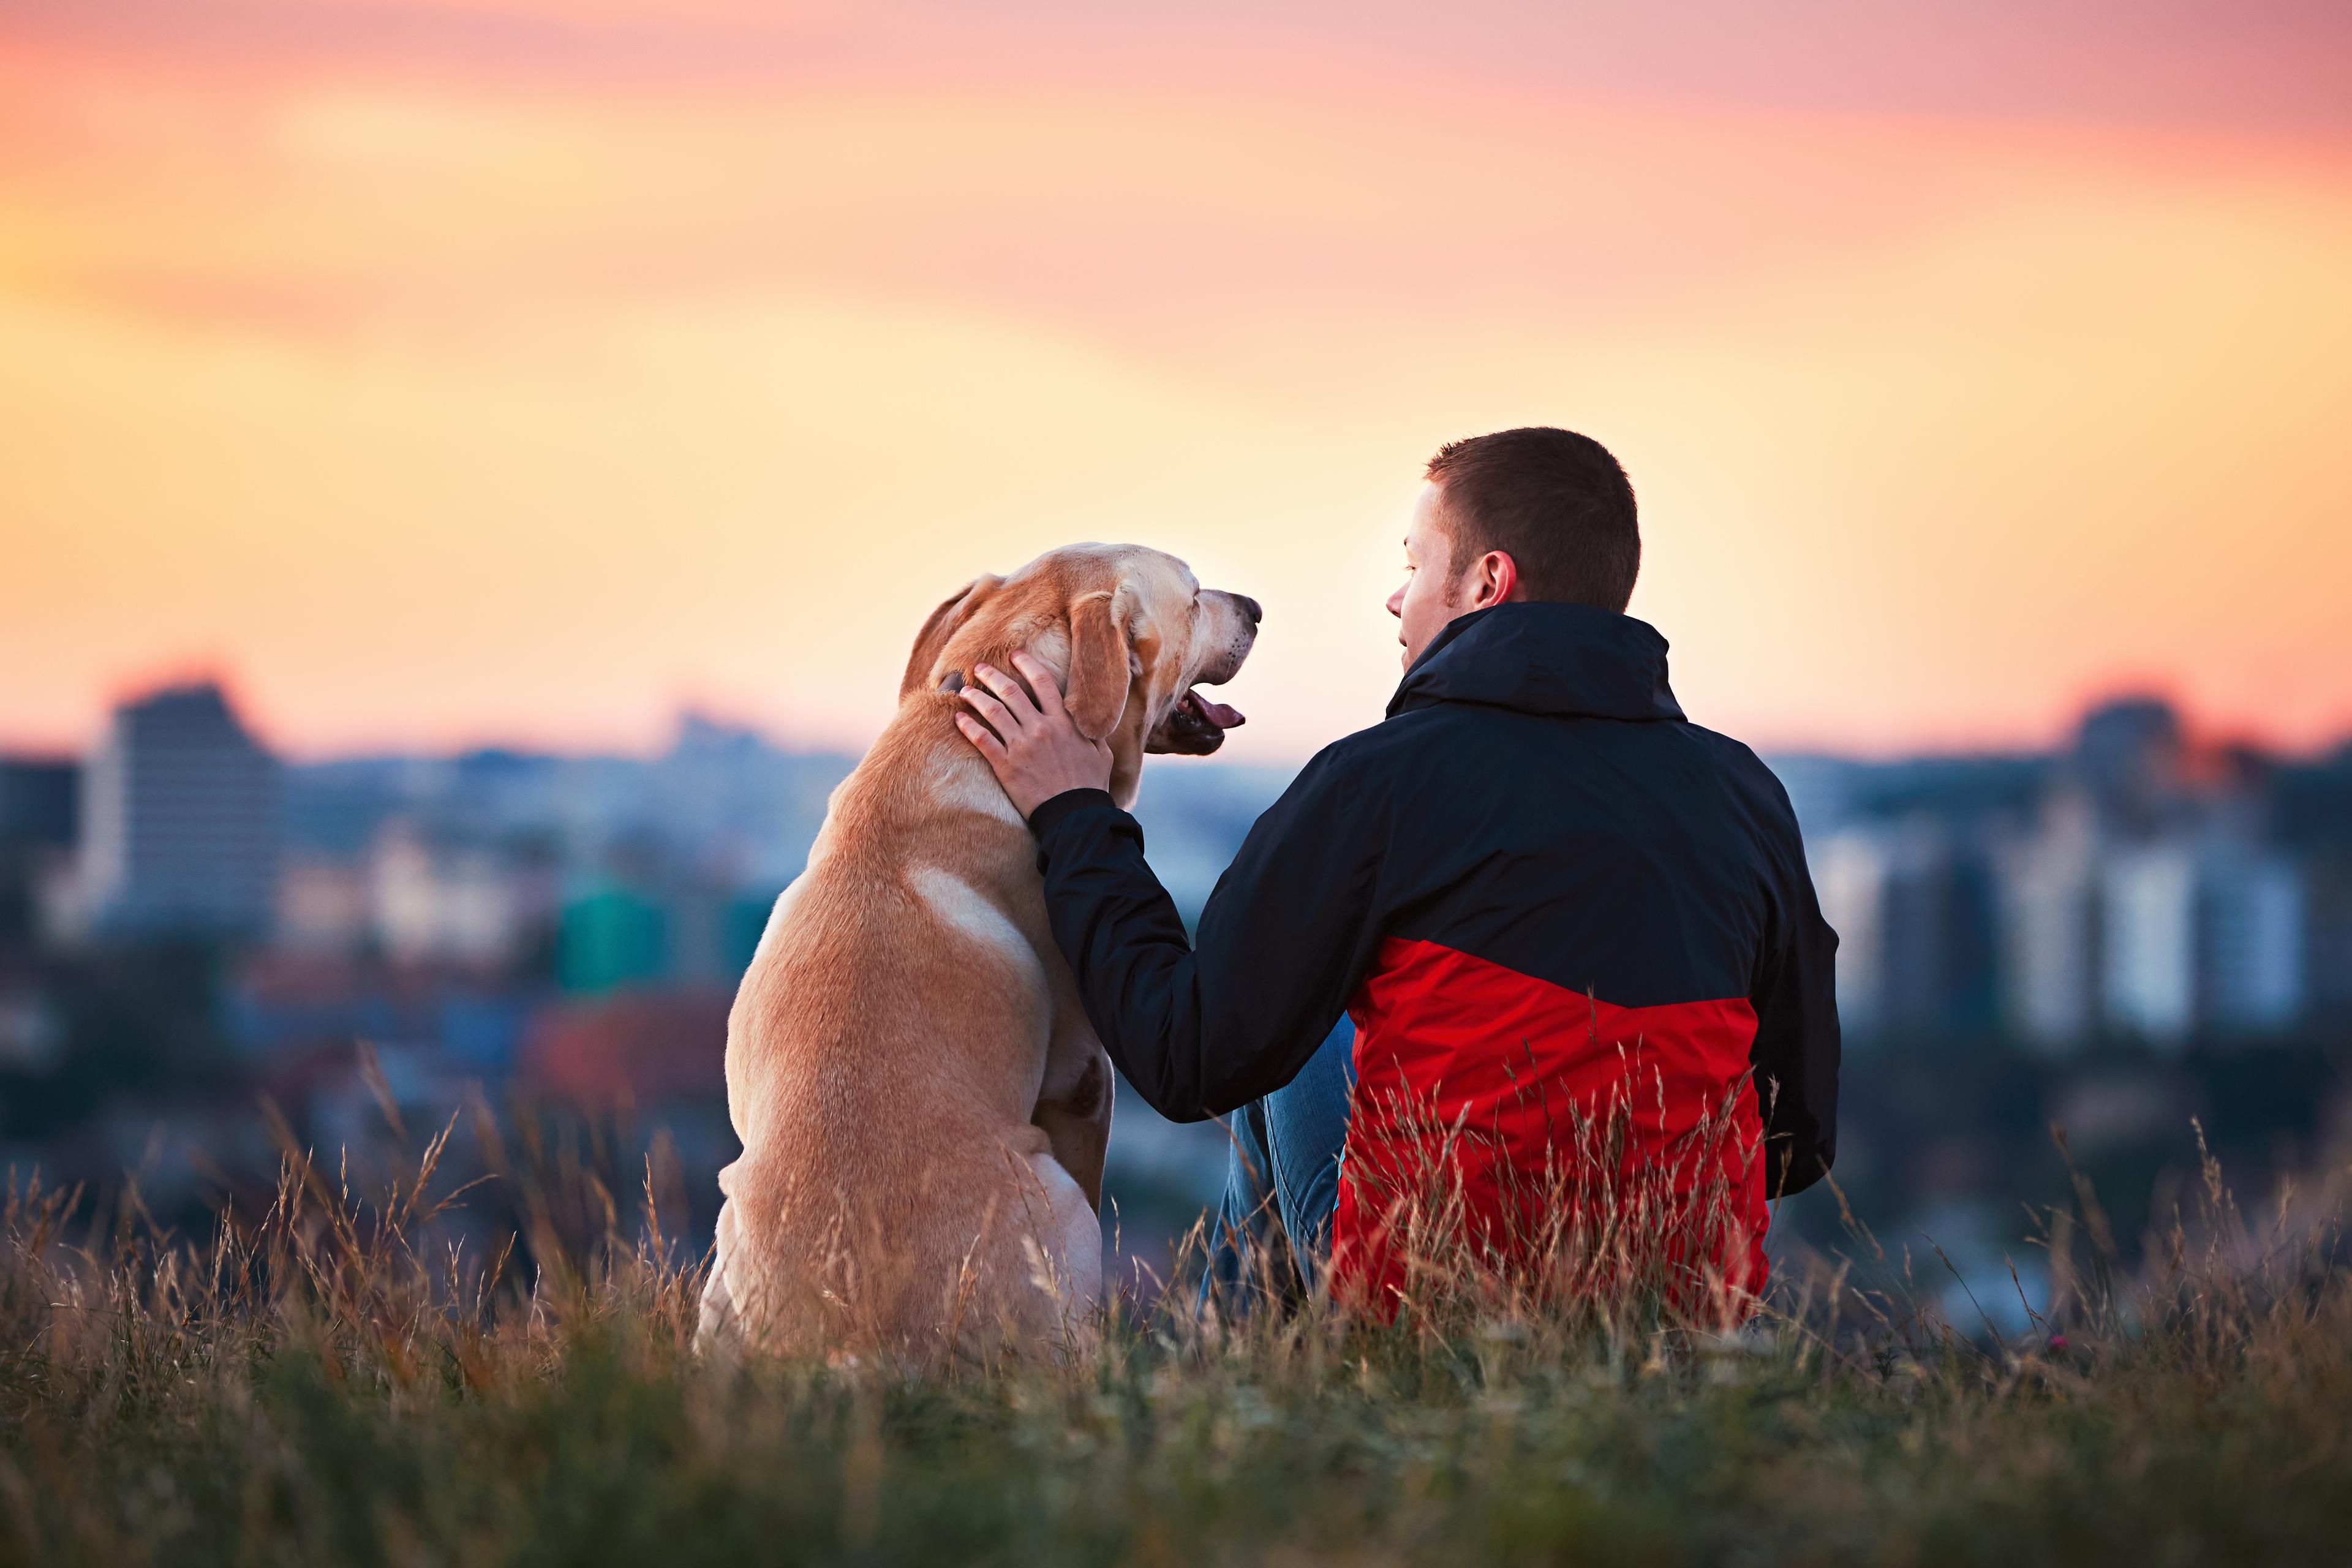 A person in a red and black jacket sits on grass with a golden retriever at sunset.